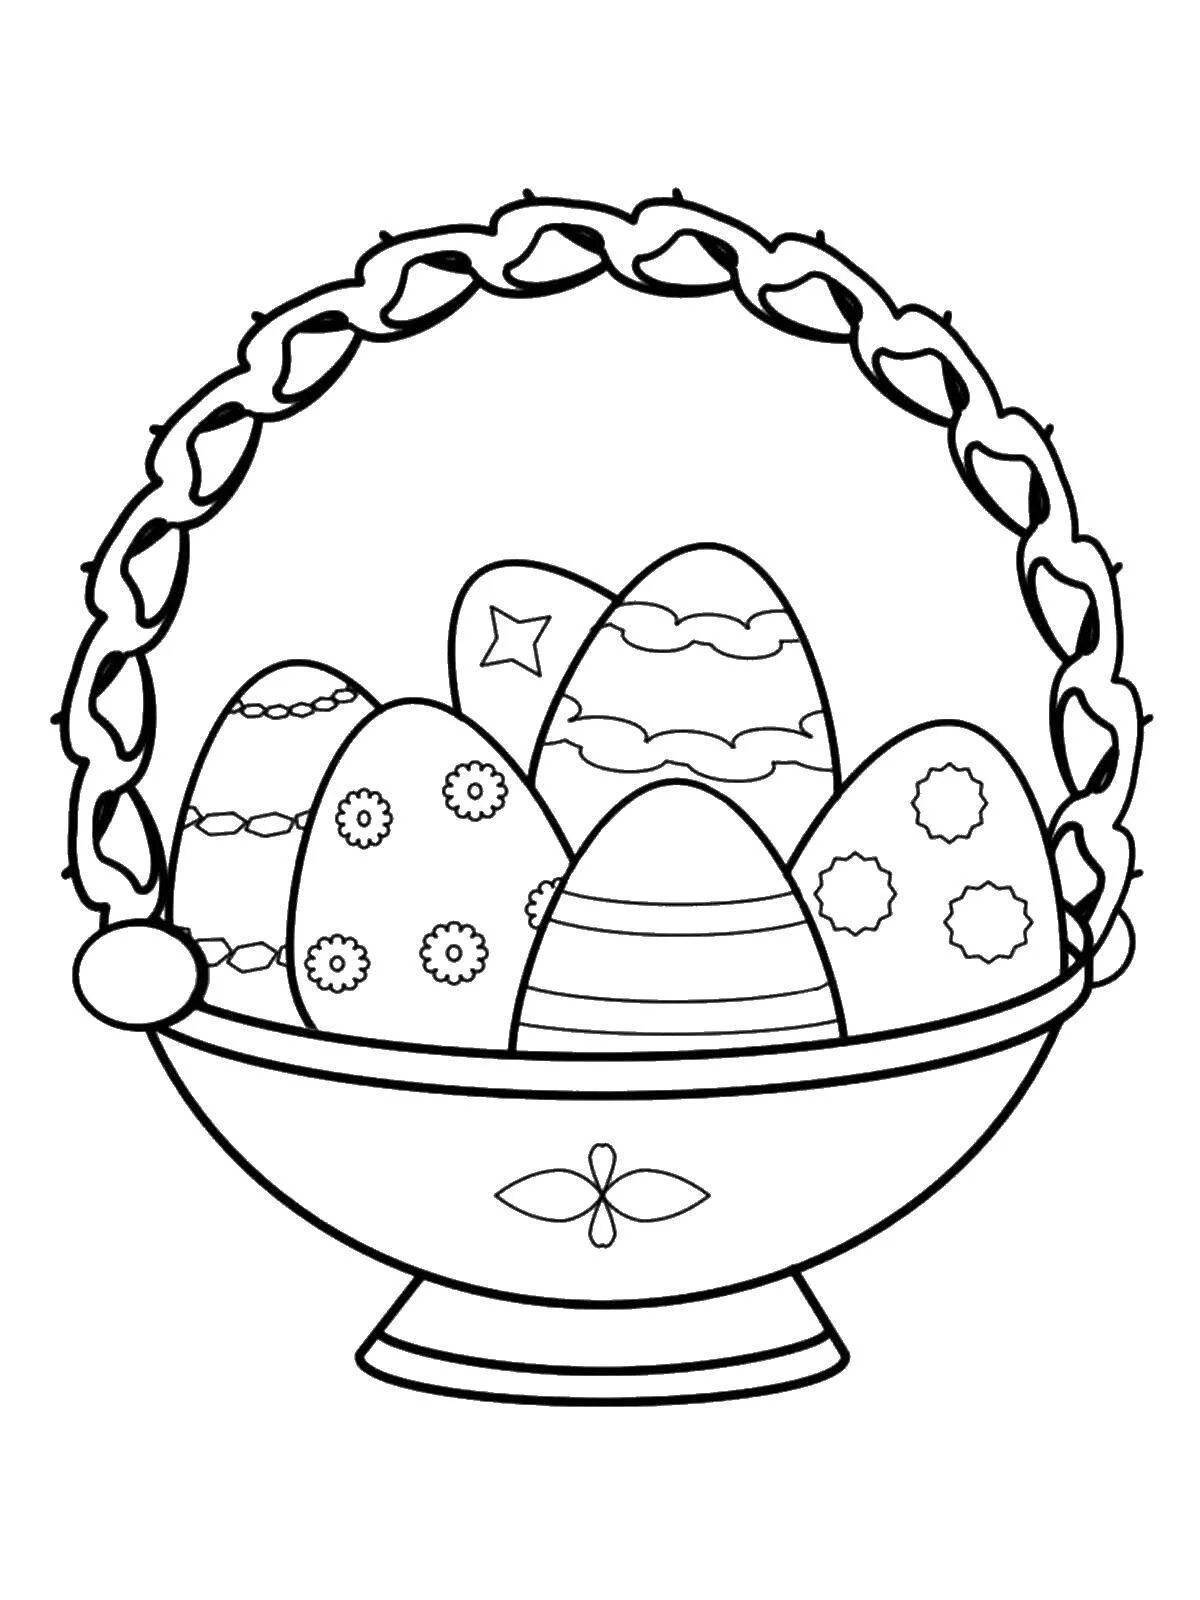 Glorious Easter coloring book for kids